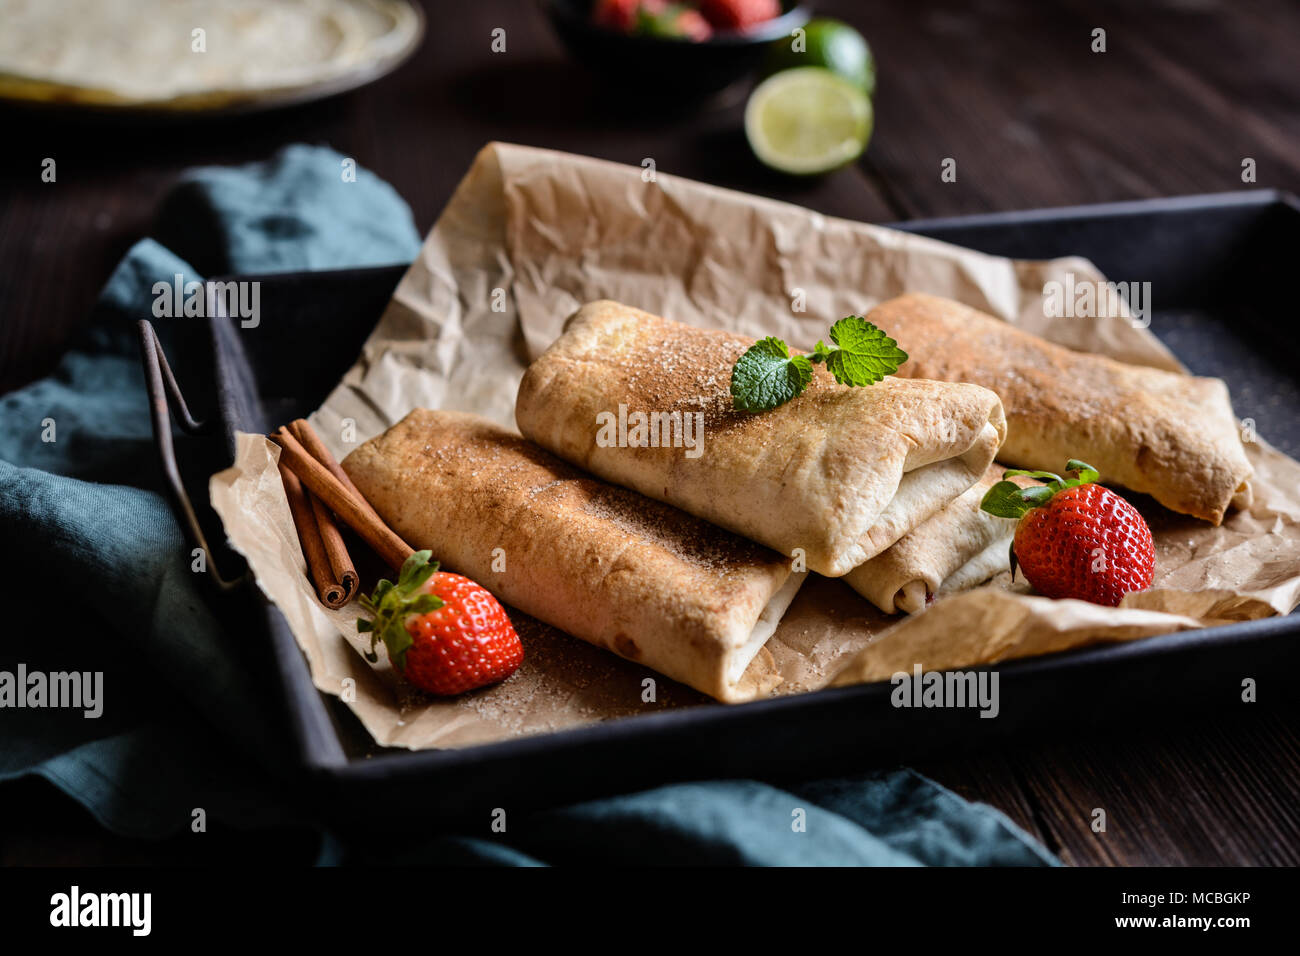 Sweet baked Chimichangas with strawberry filling and cinnamon sugar icing Stock Photo